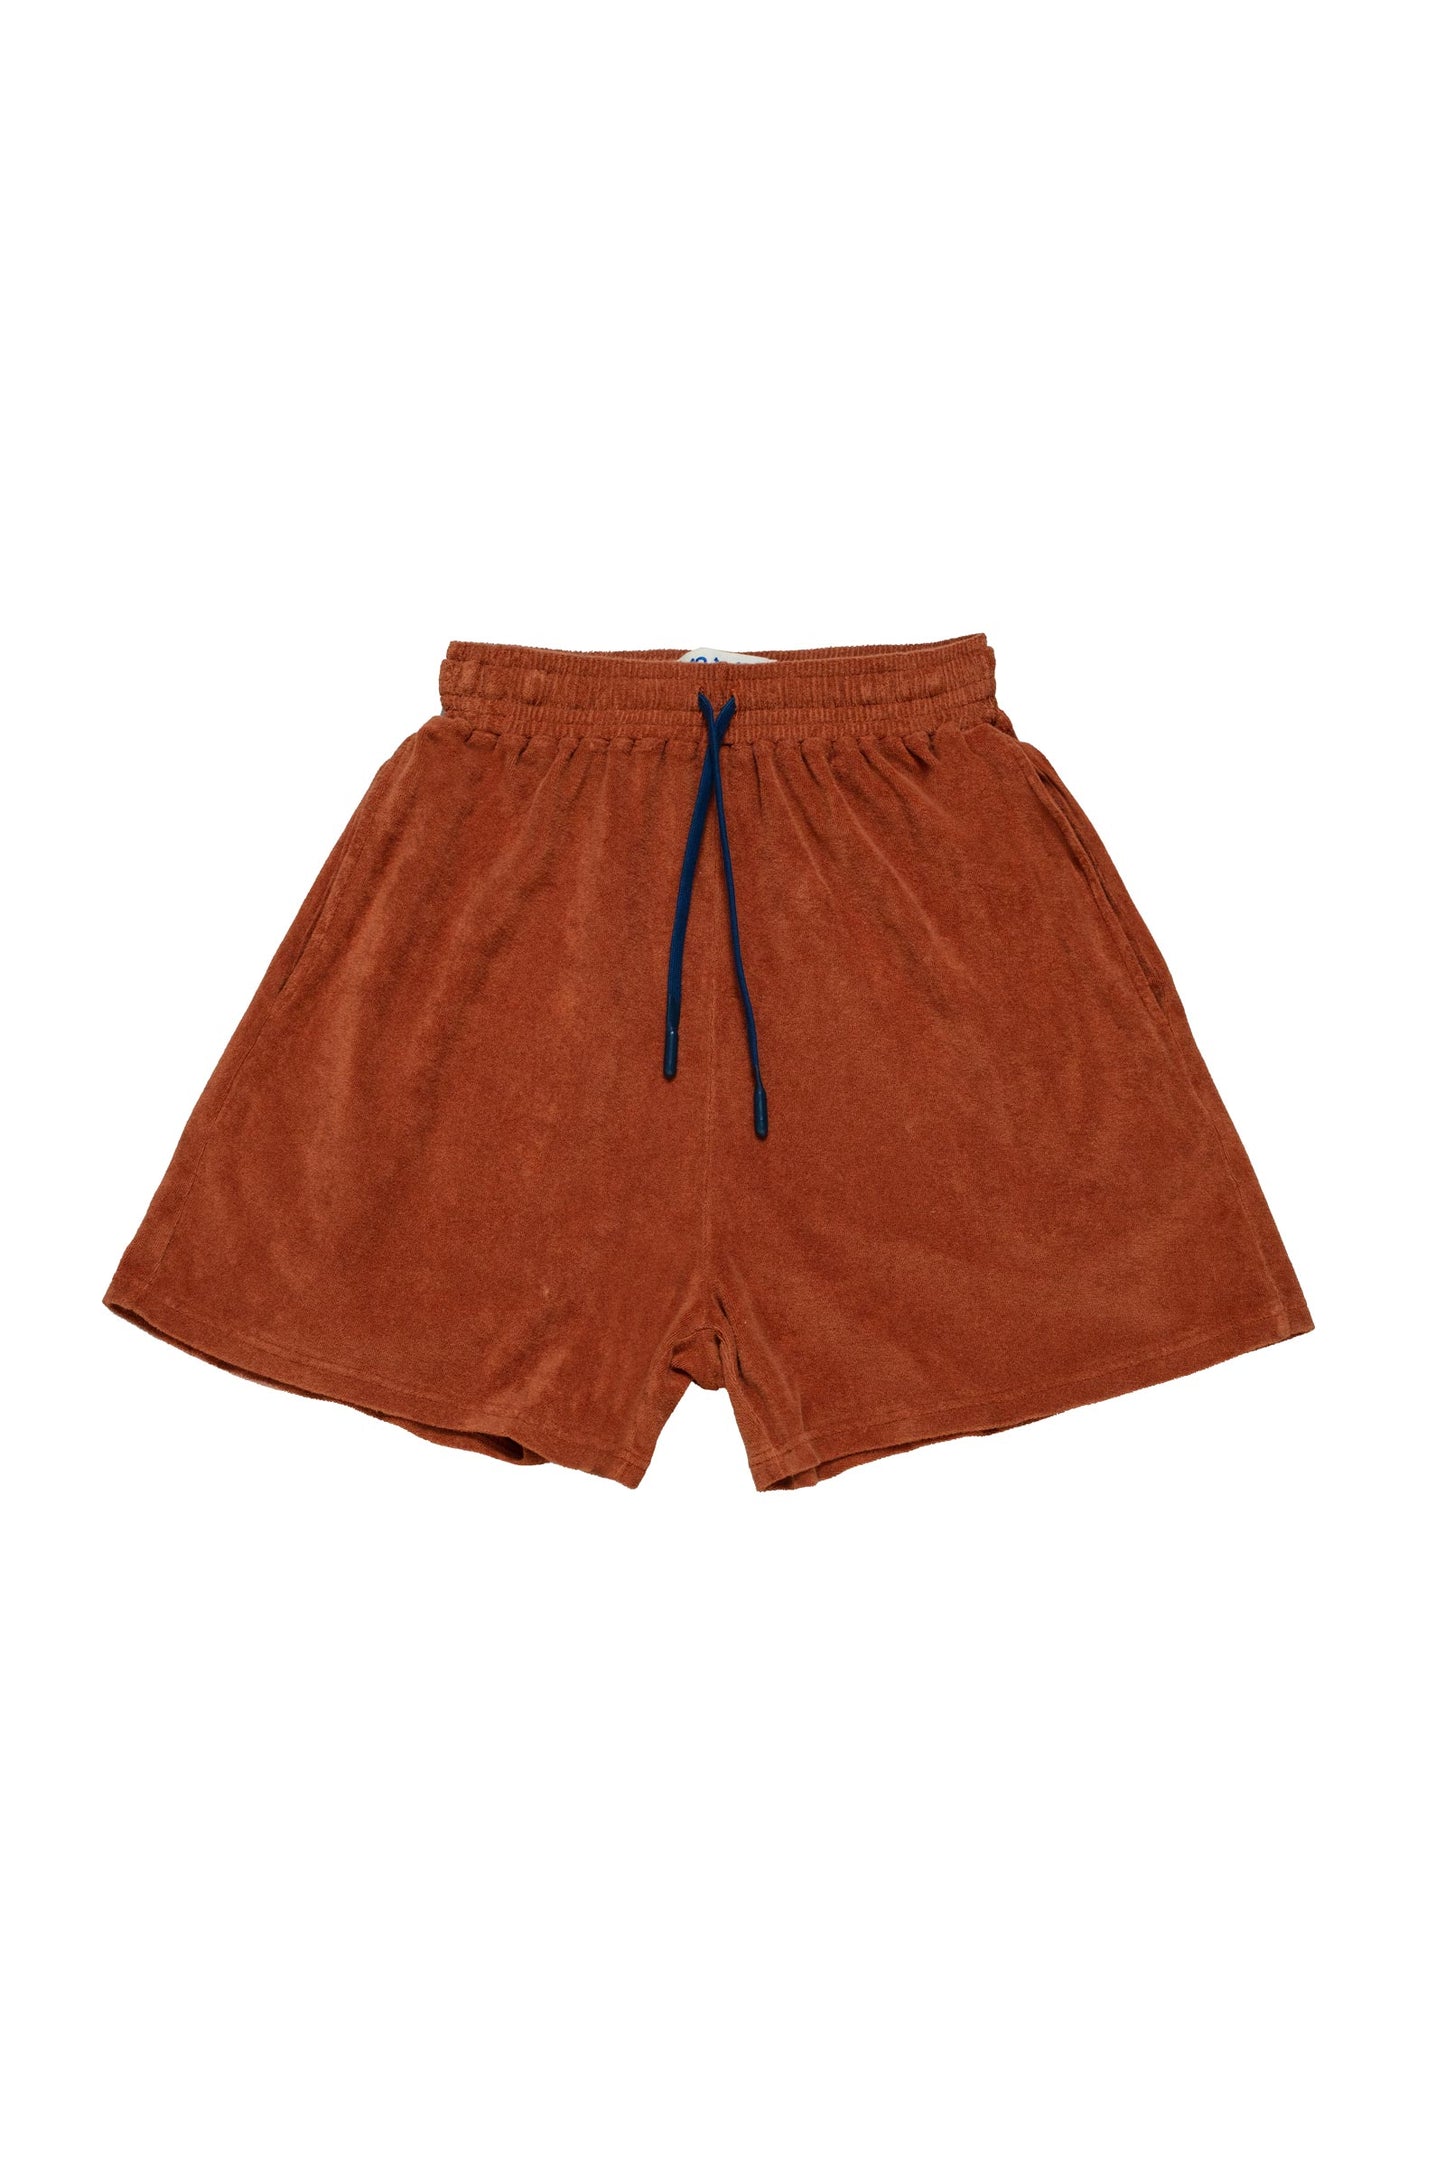 10 to 10 Cotton shorts in ginger colour with blue cord